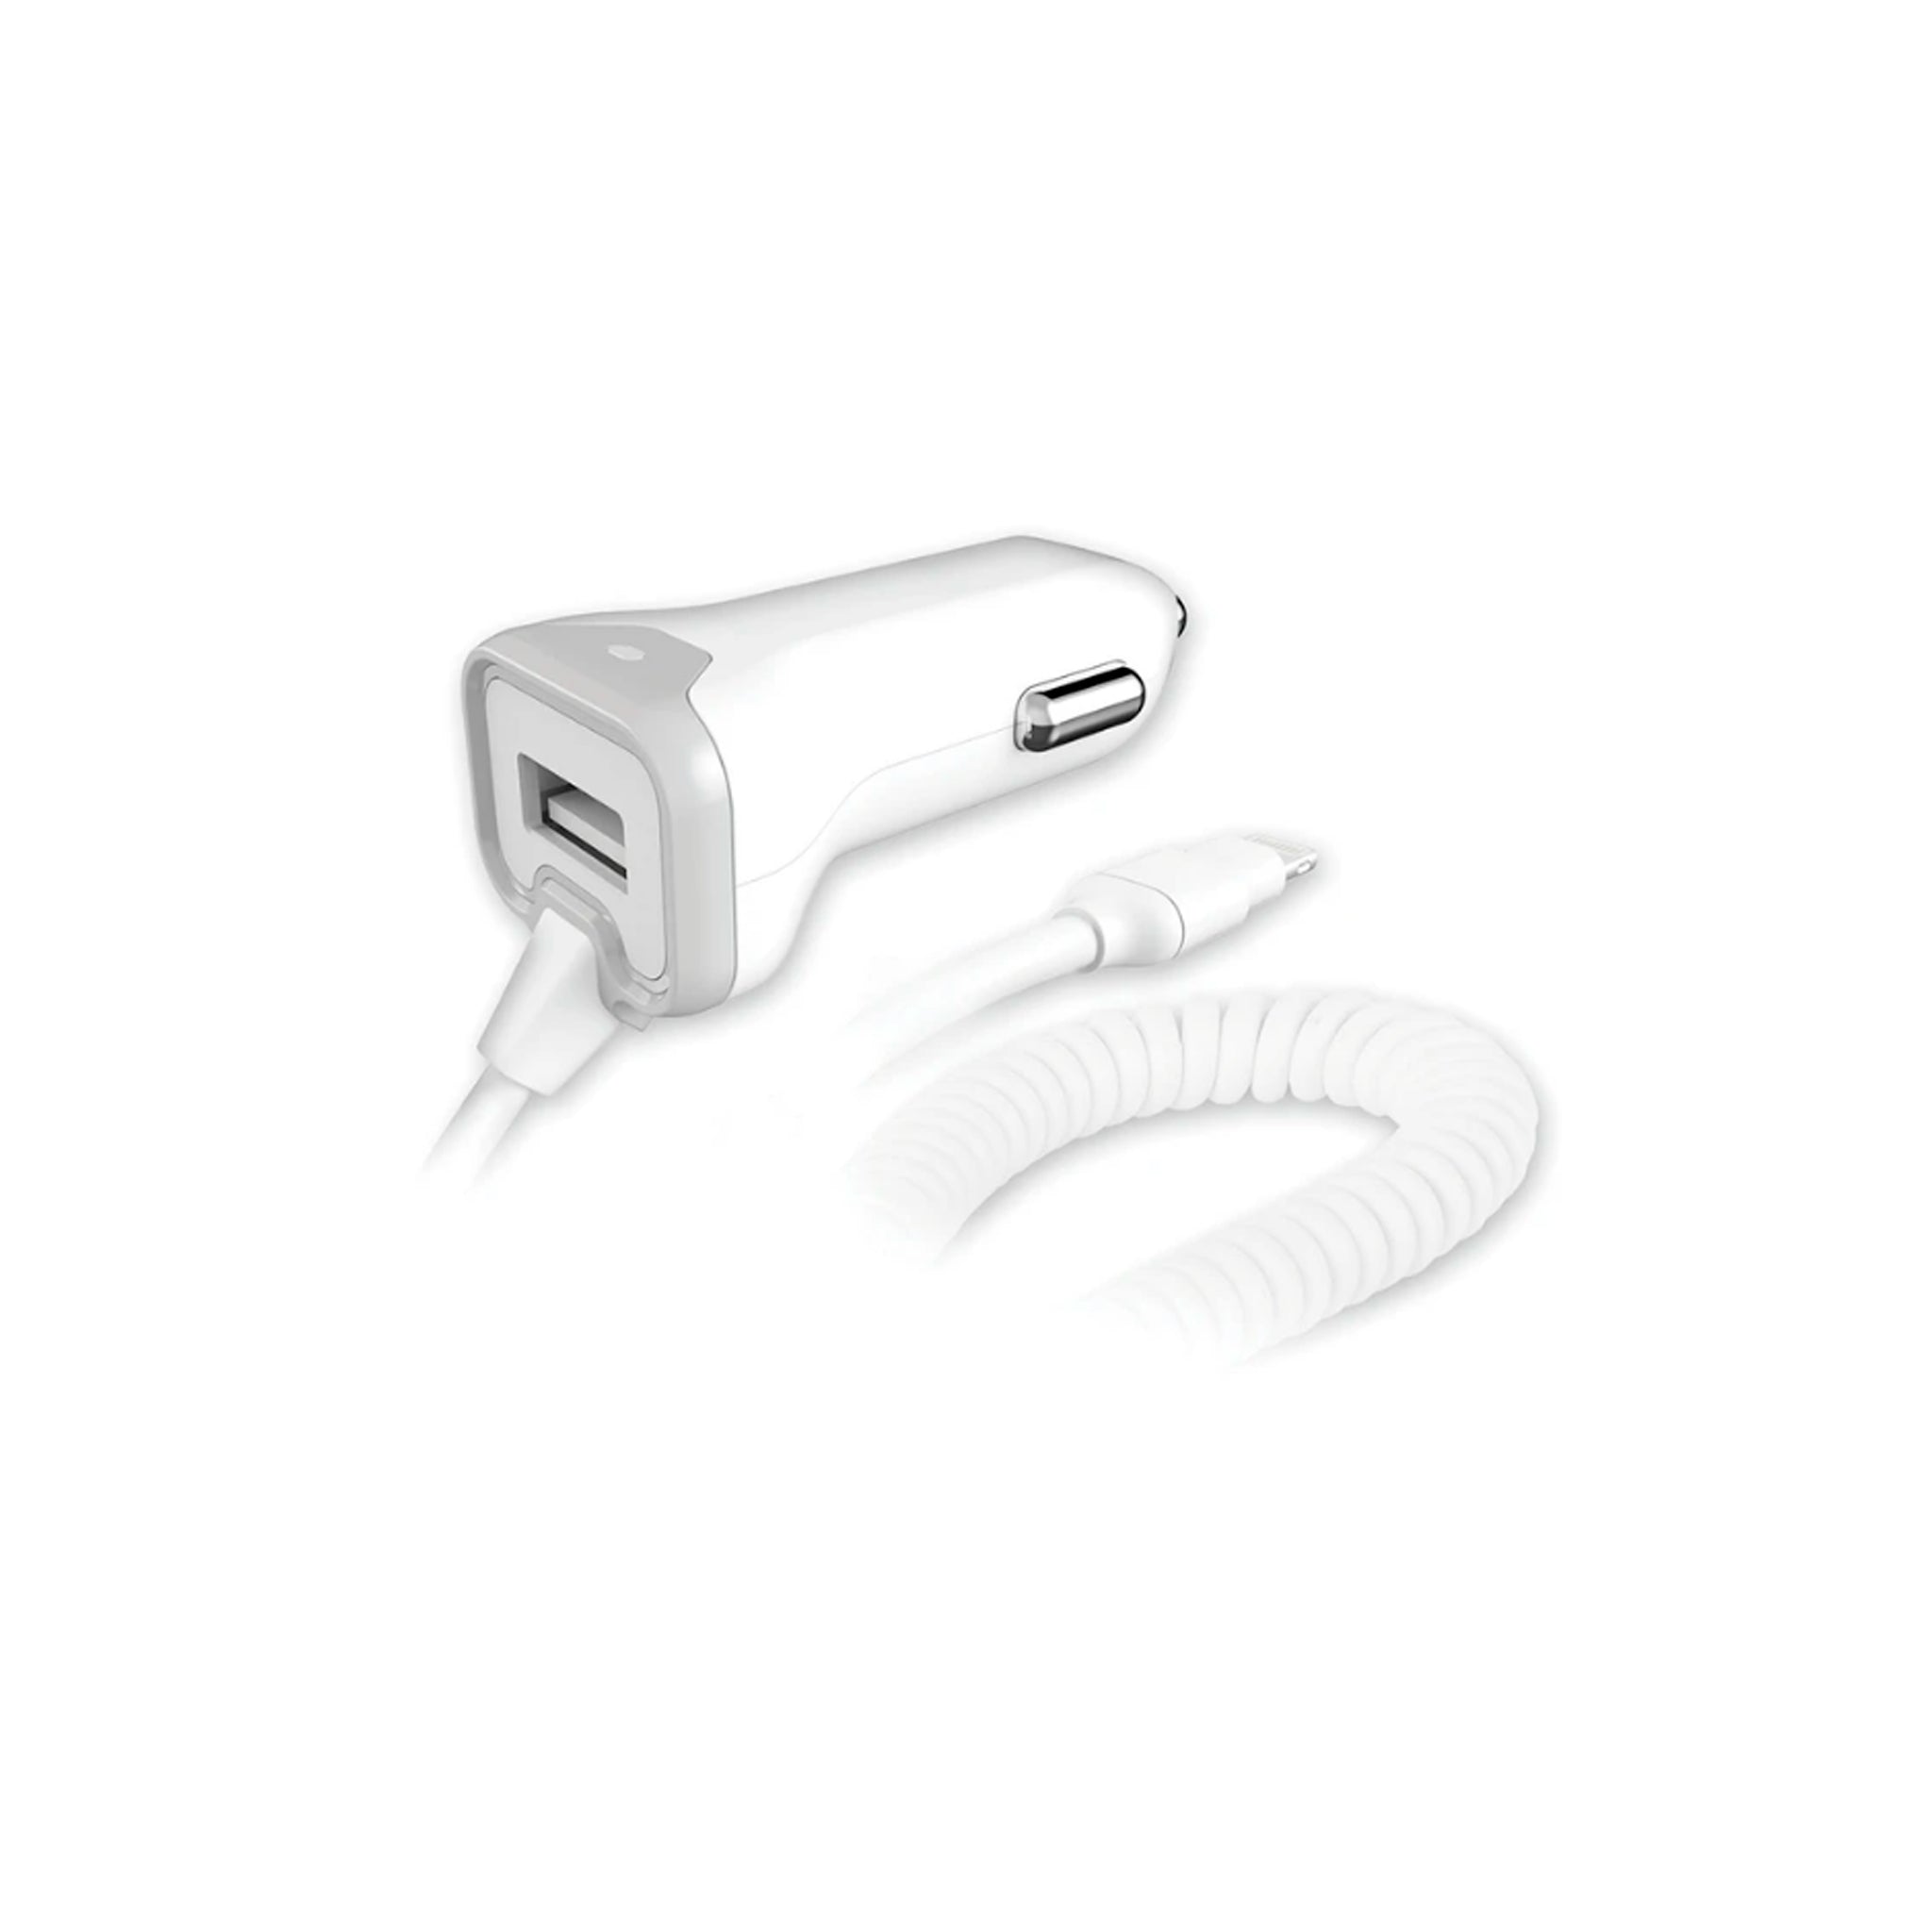 Qmadix - Car Charger 3.4a For Apple Lightning Devices With Additional Port - White